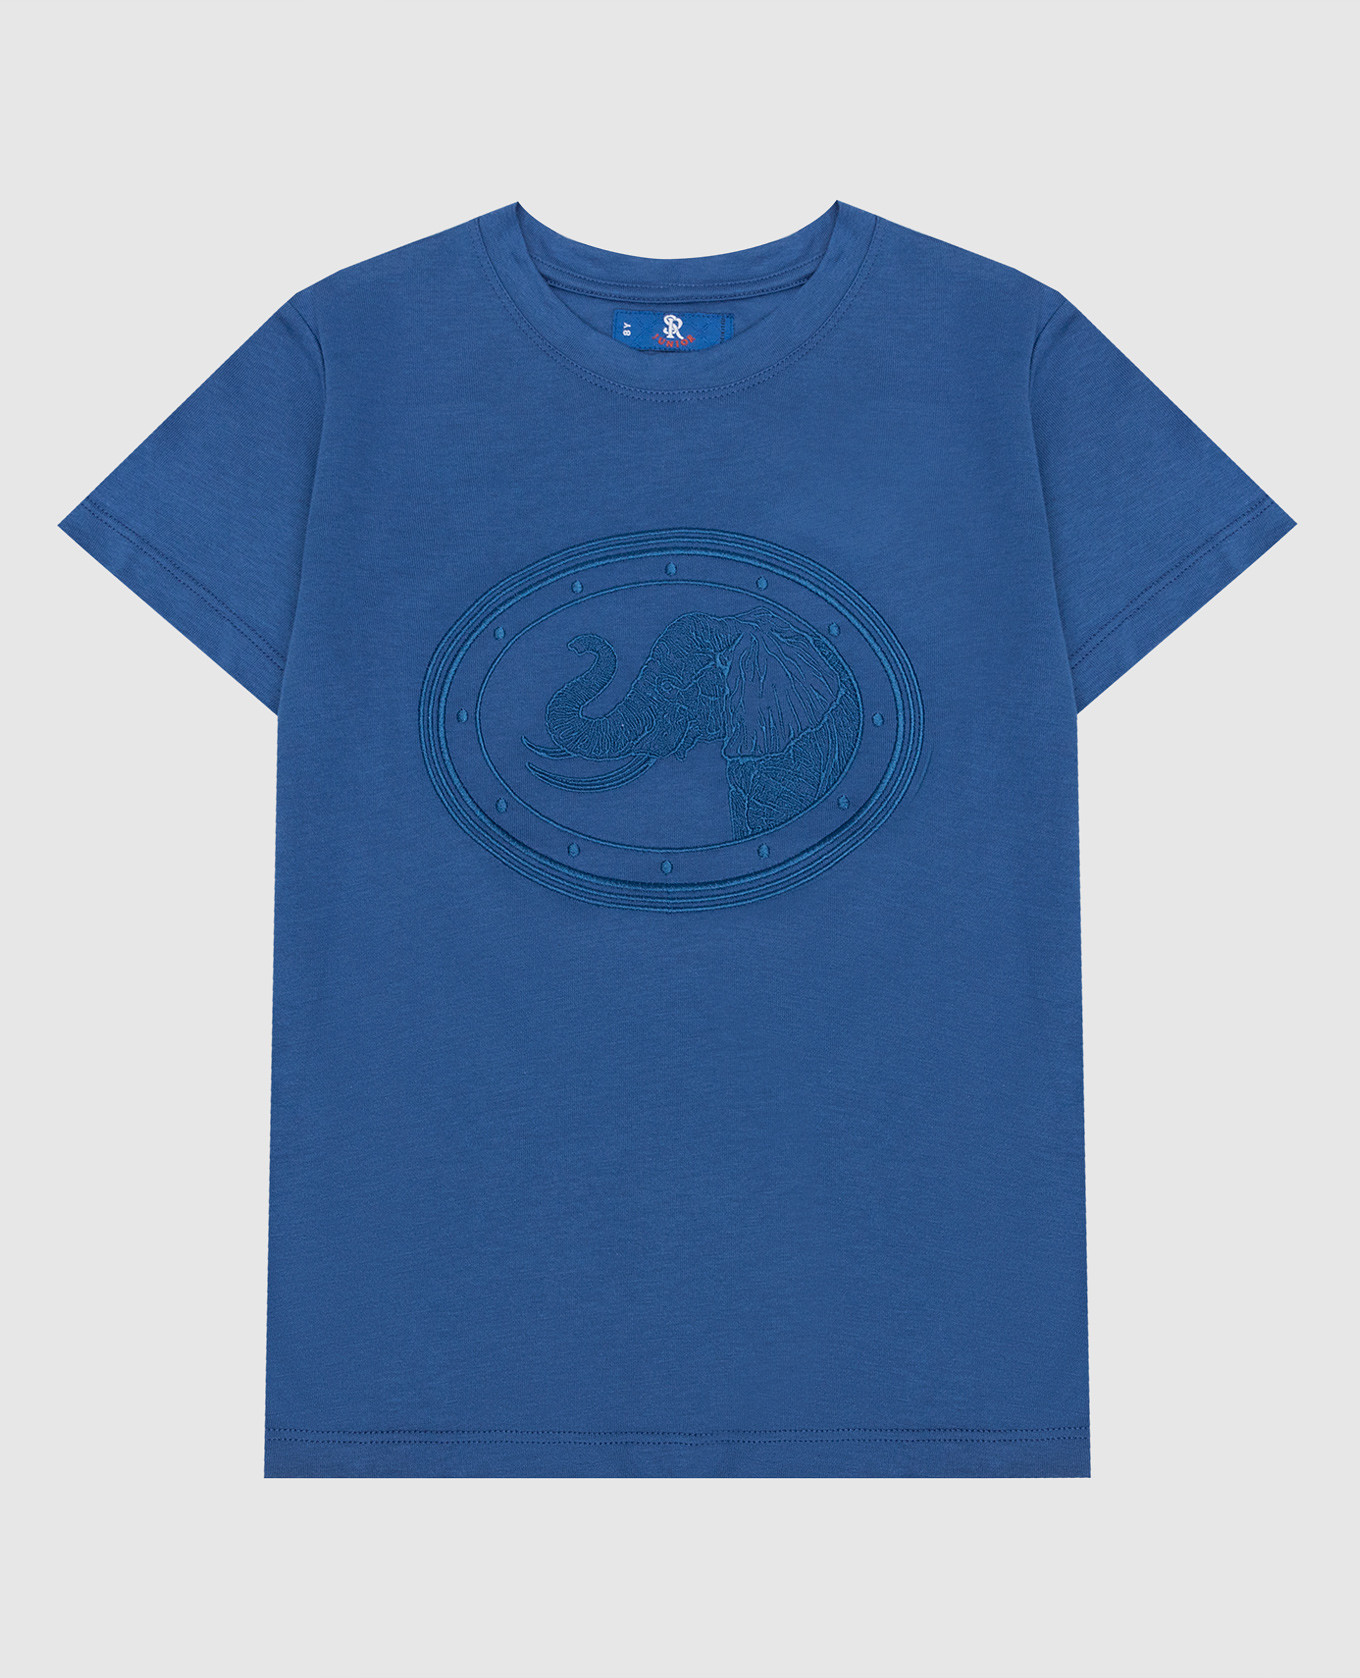 Children's blue t-shirt with embroidery